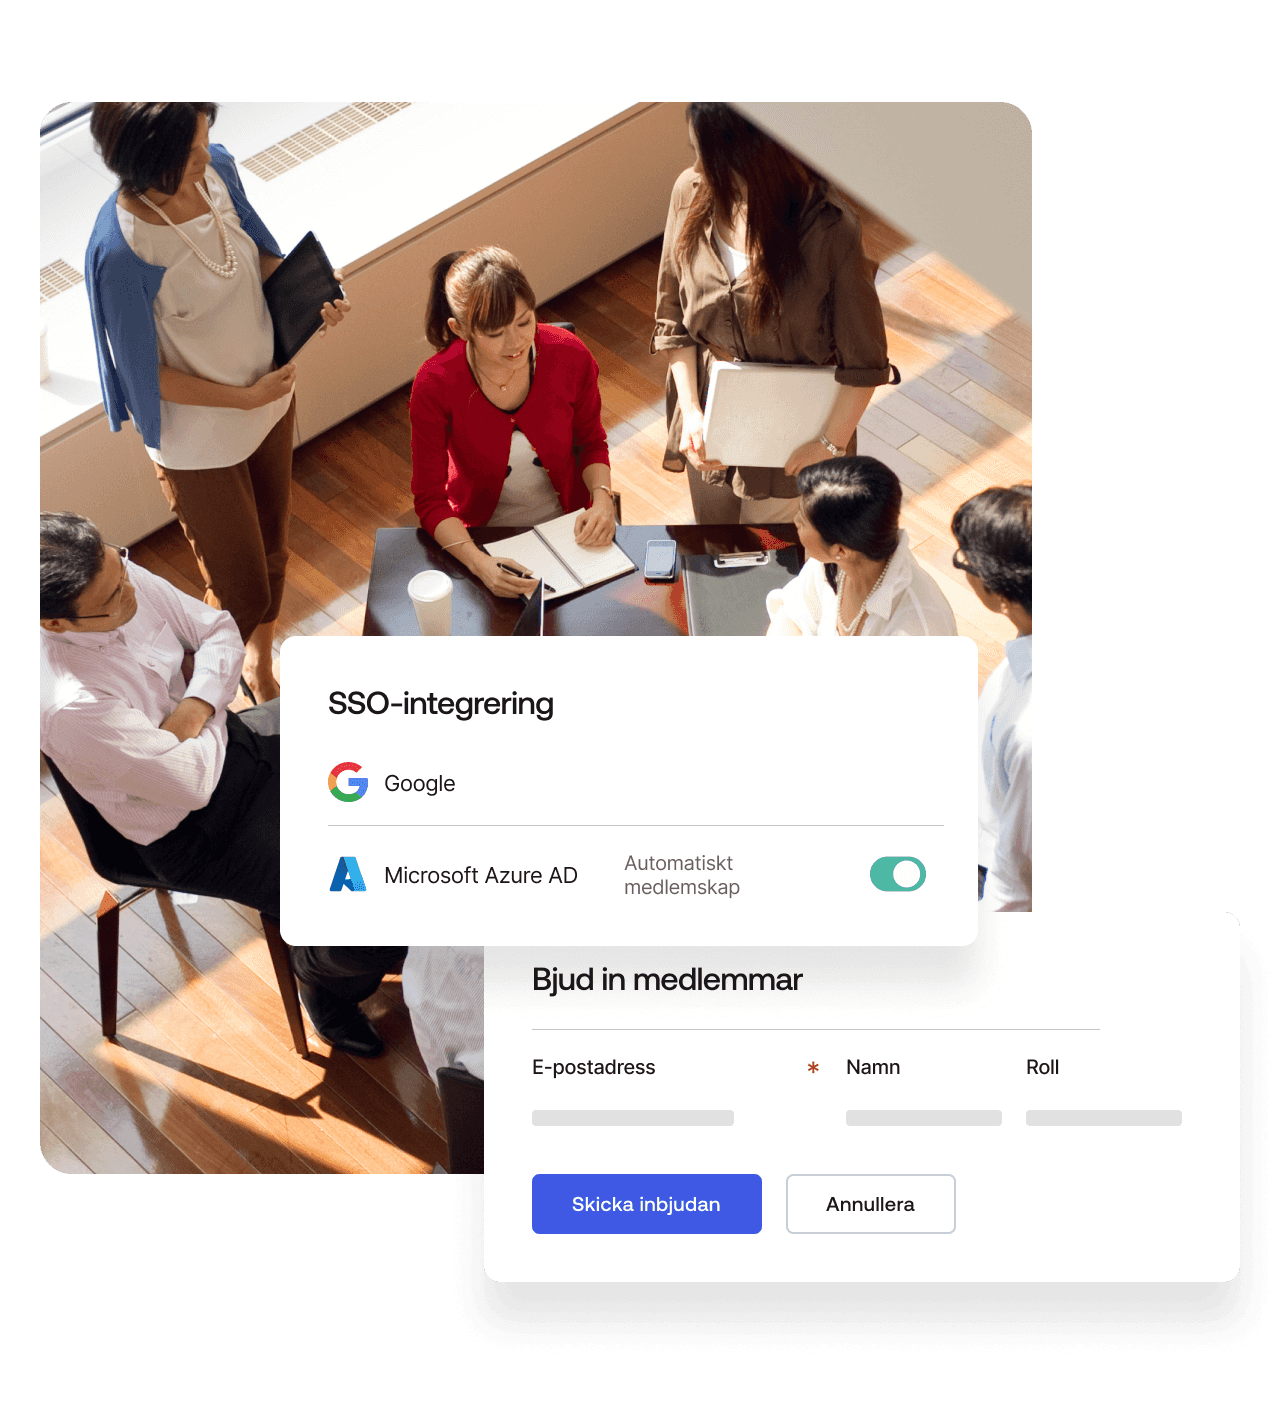 Image of SSO integration options and the option to invite members overlaying an image of colleagues collaborating in the office.